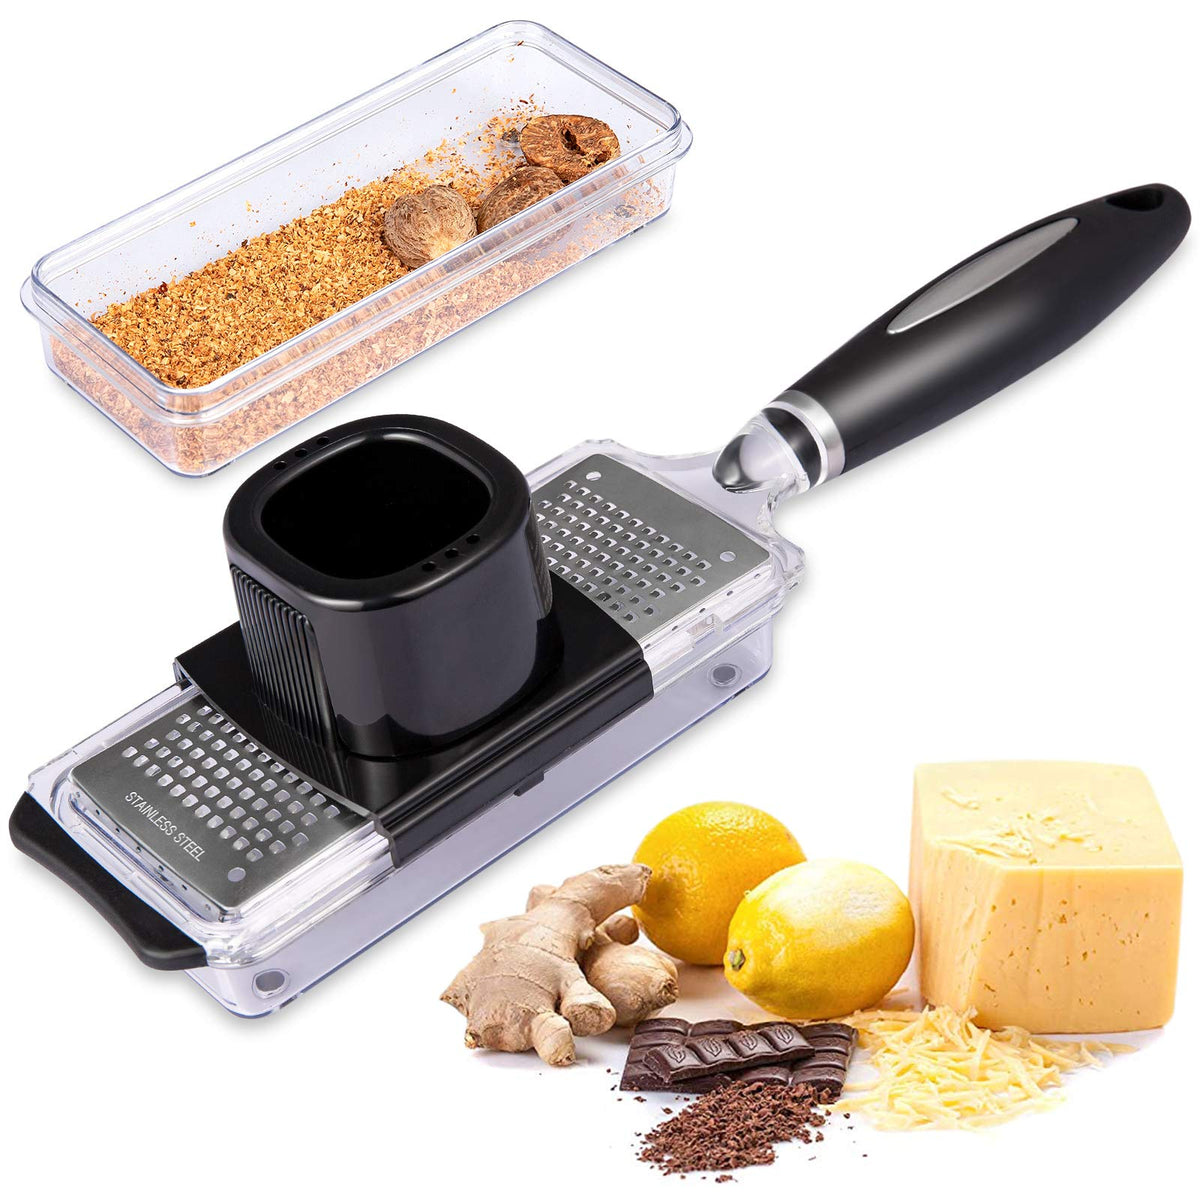 Stainless Steel Cheese Grater, Lemon, Citrus and Channel Knife for Kitchen,  Ginger, Garlic, Nutmeg, Chocolate, Vegetables, Fruits, Non-Slip Handle